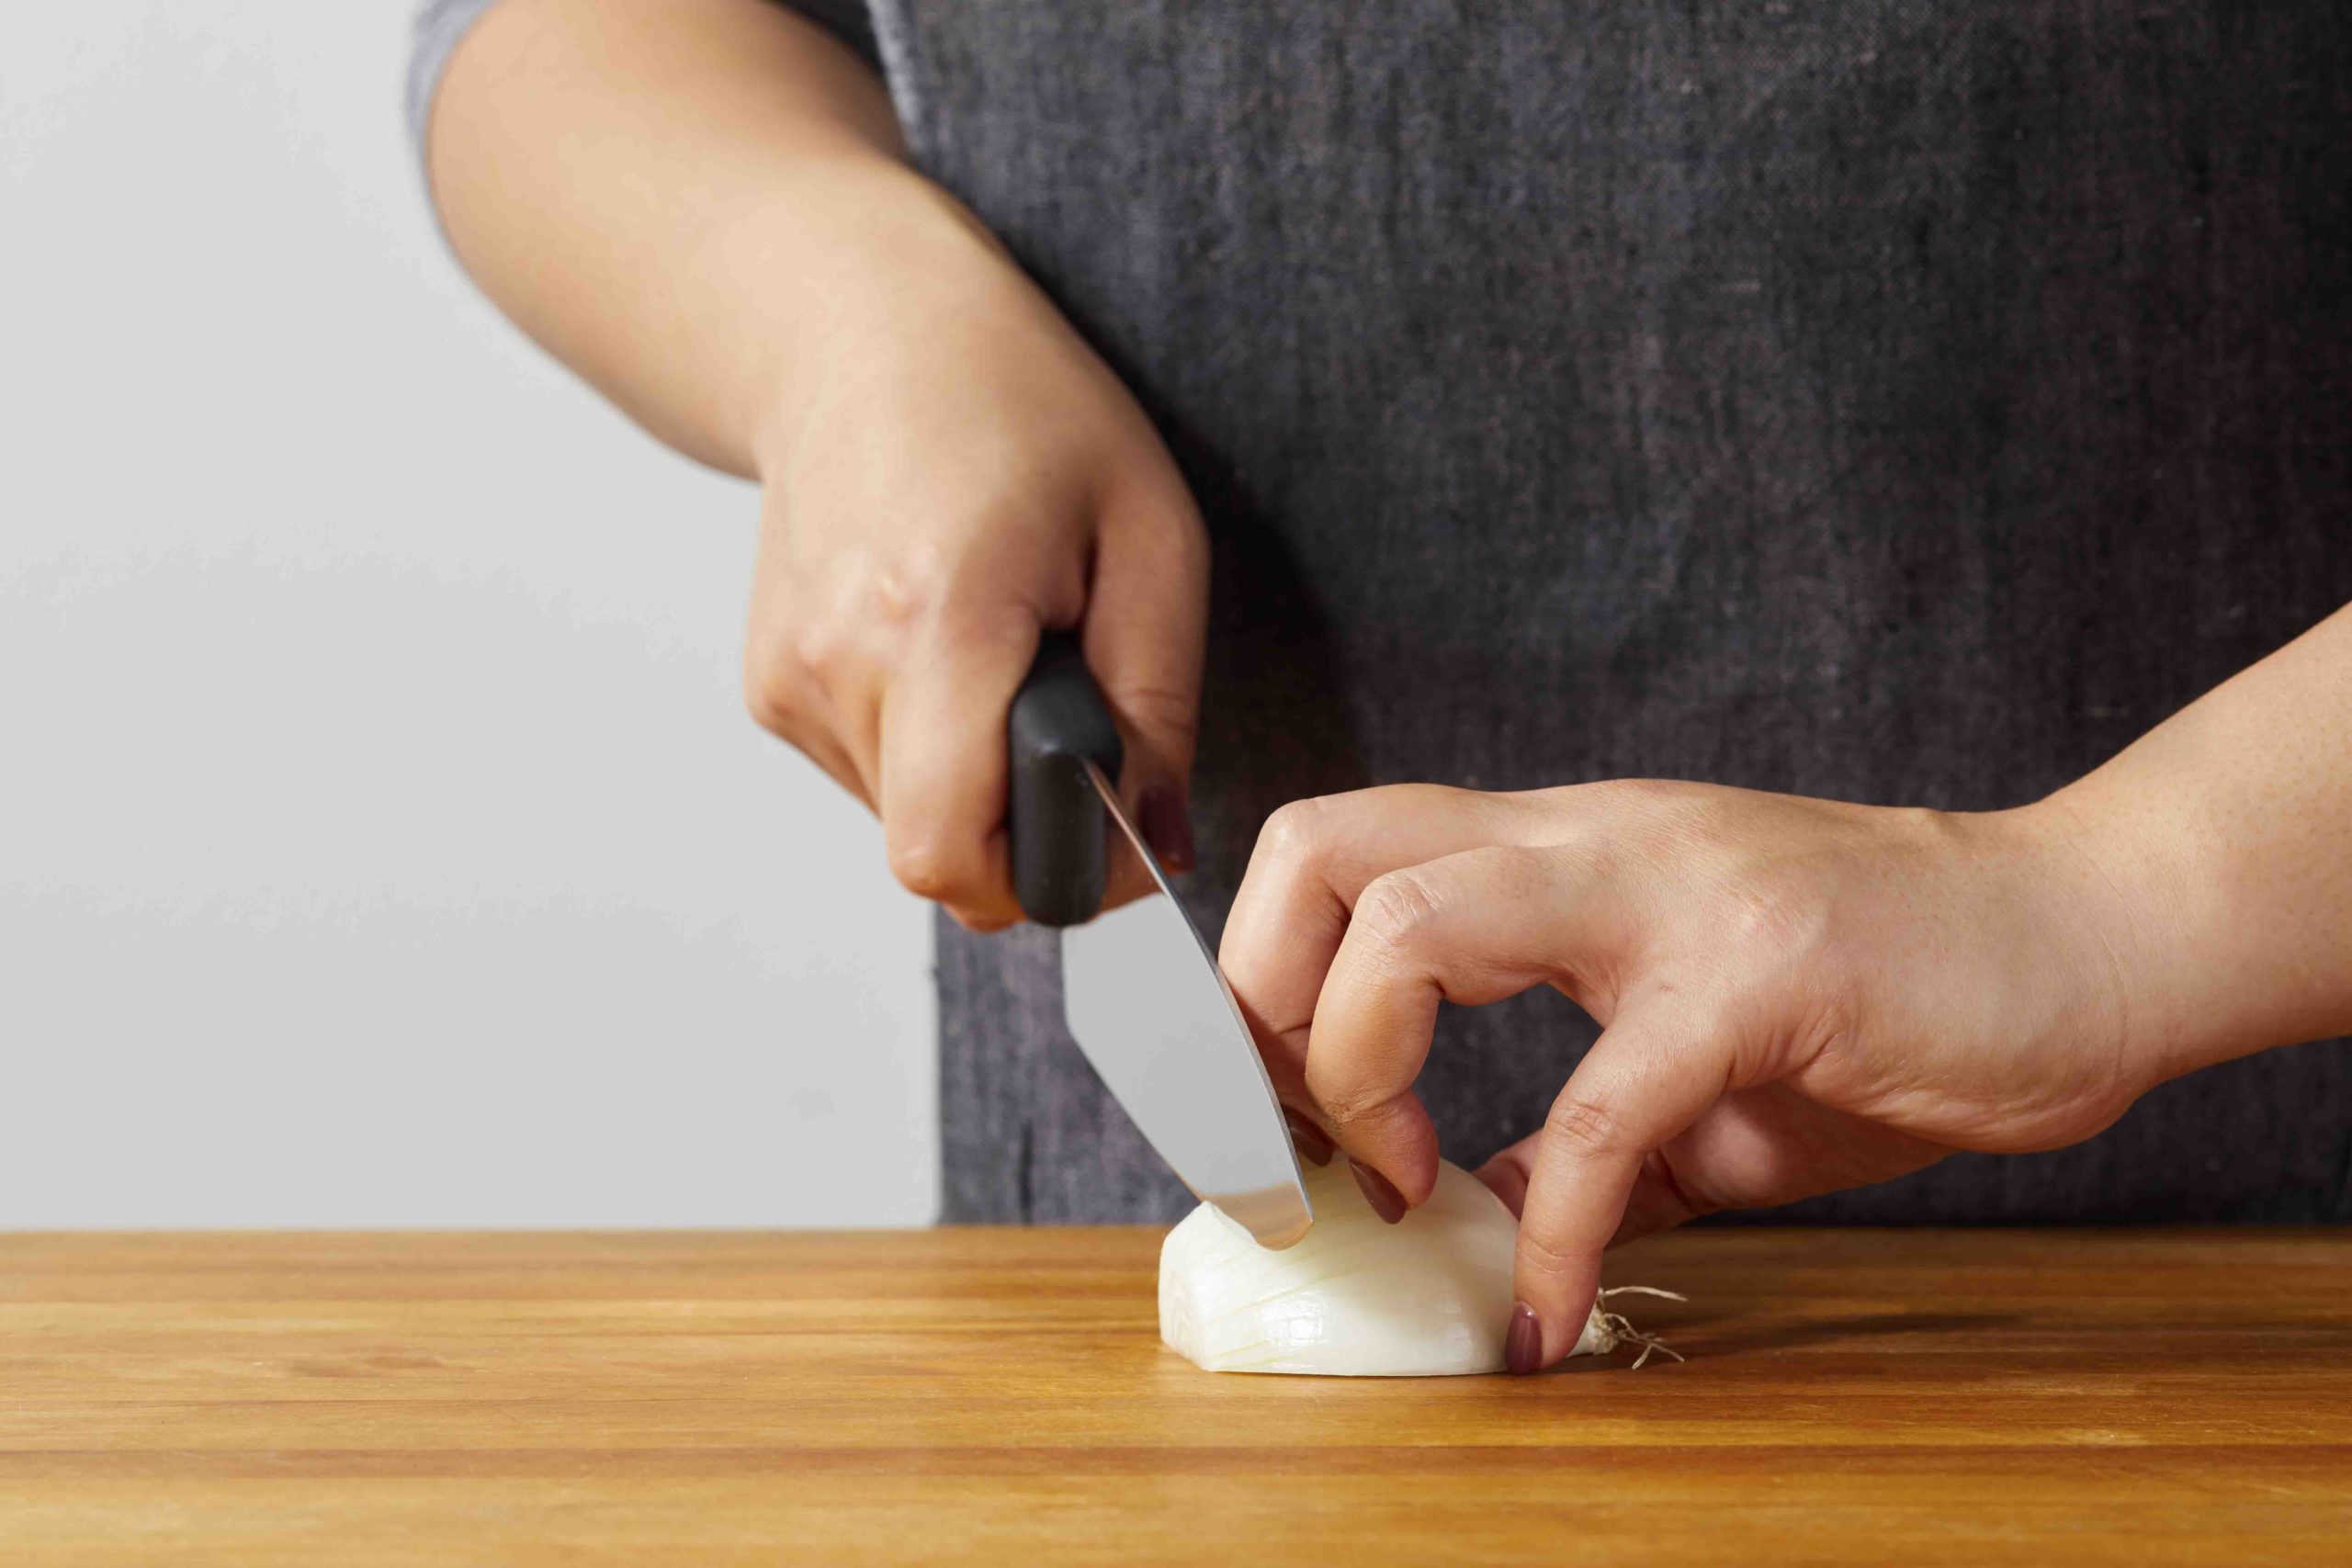 The midsection of a person who stands behind a counter working over a cutting board holding an onion, shaping their hand into a claw to avoid cutting the tips